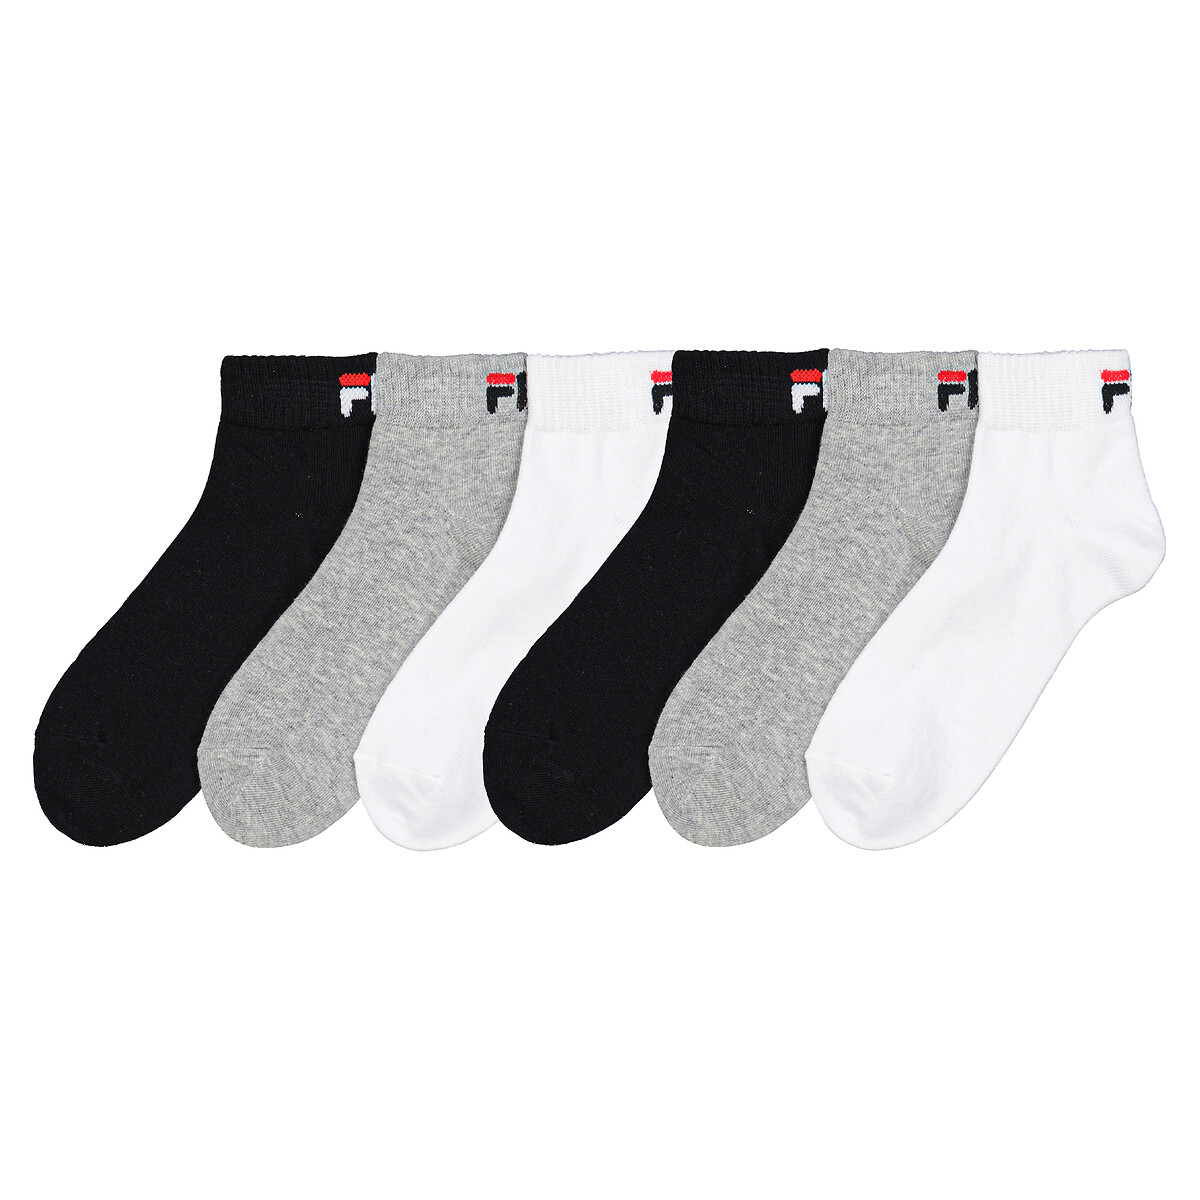 Pack of 6 Pairs of Trainer Socks in Cotton Mix